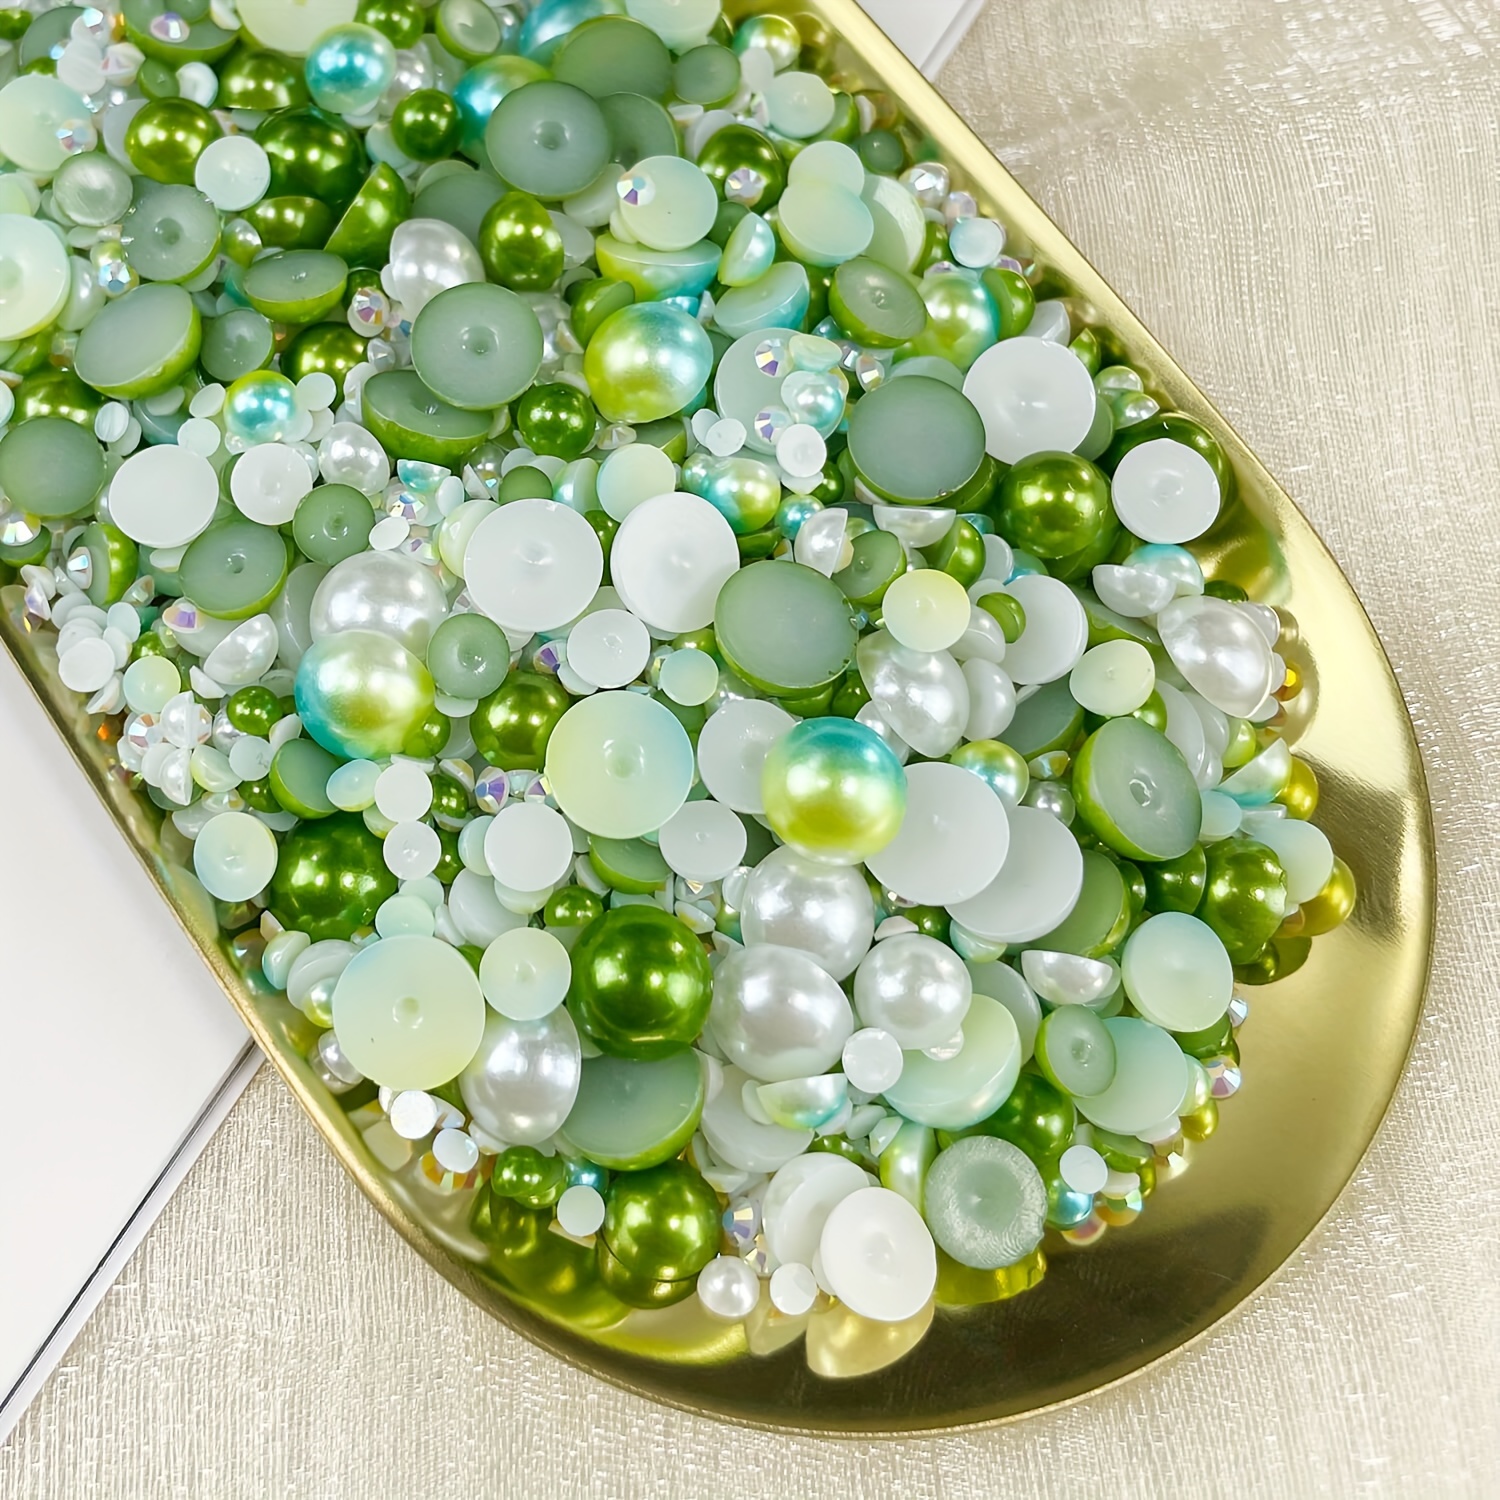 60g Cyan Green Flat Back Pearls Rhinestones for Crafts Mixed Size 3mm-10mm AB Color Round Half Pearls Flatback Pearl Beads and Resin Rhinestones Set